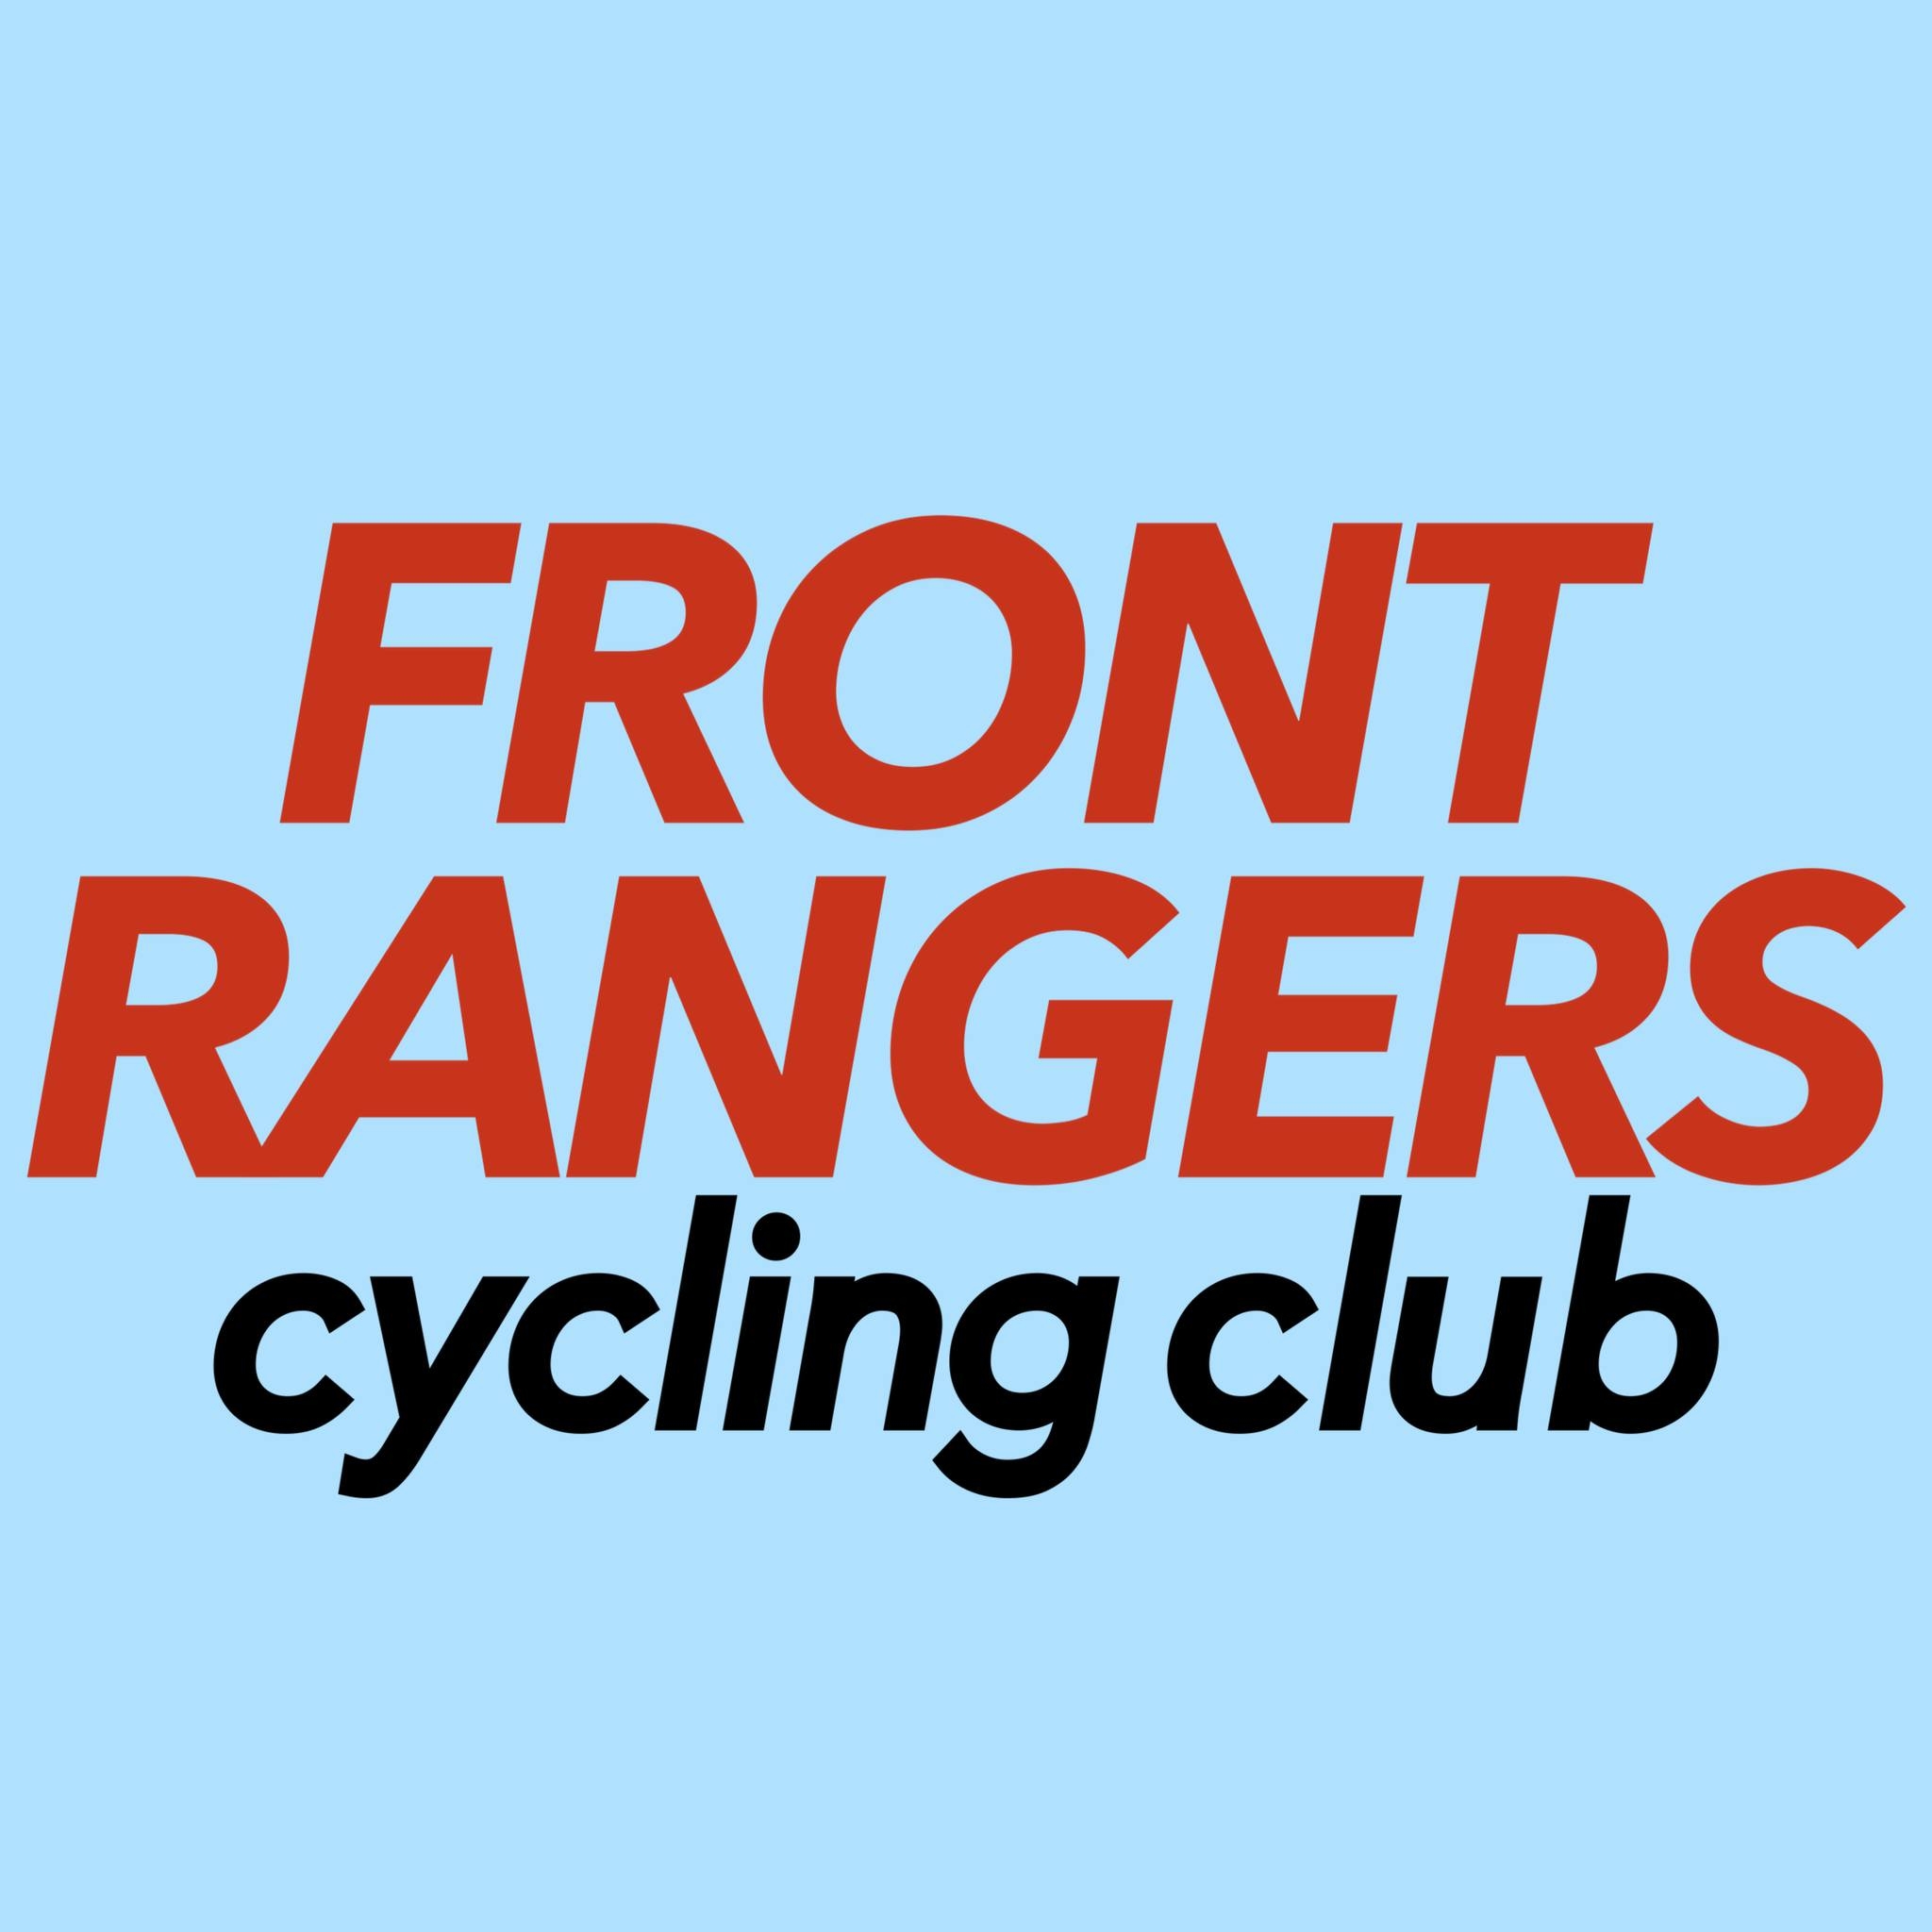 frot rangers cycling club